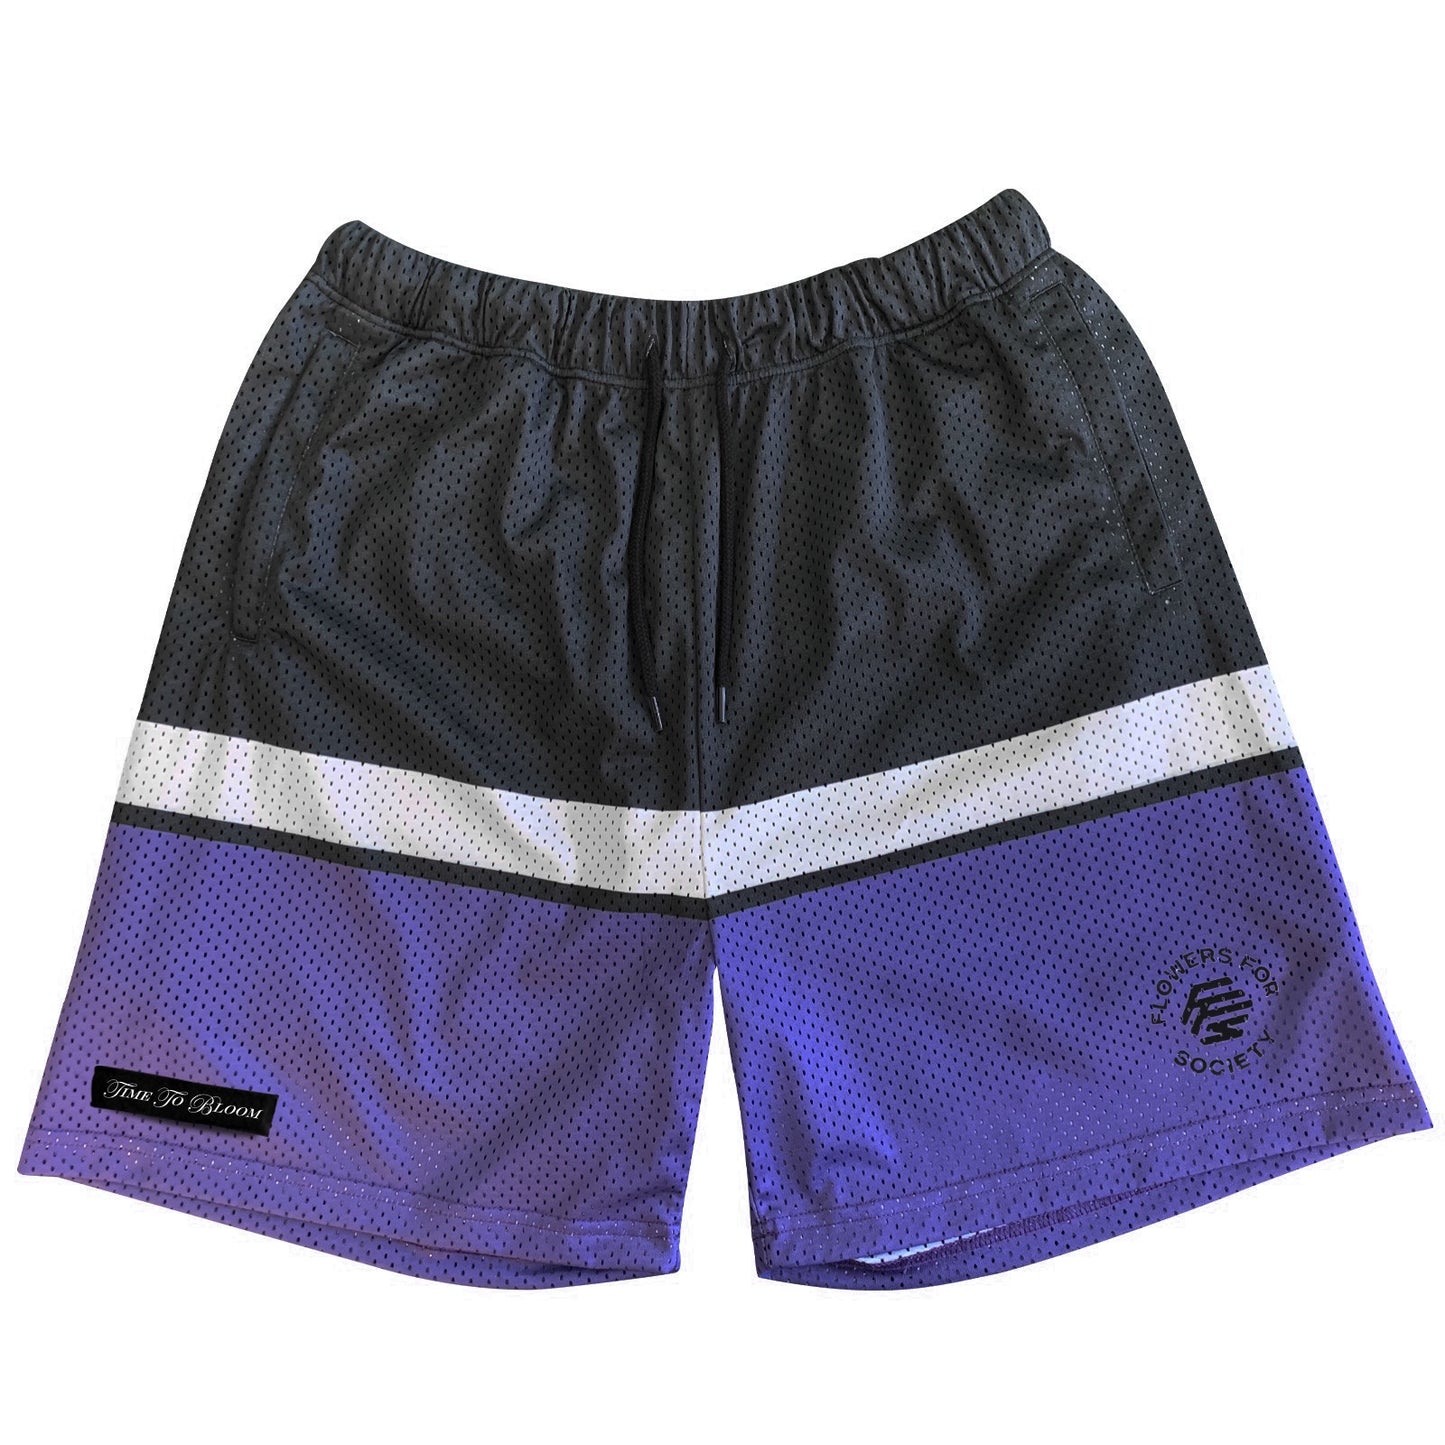 Flowers for Society flowers mesh shorts black purple white frontview